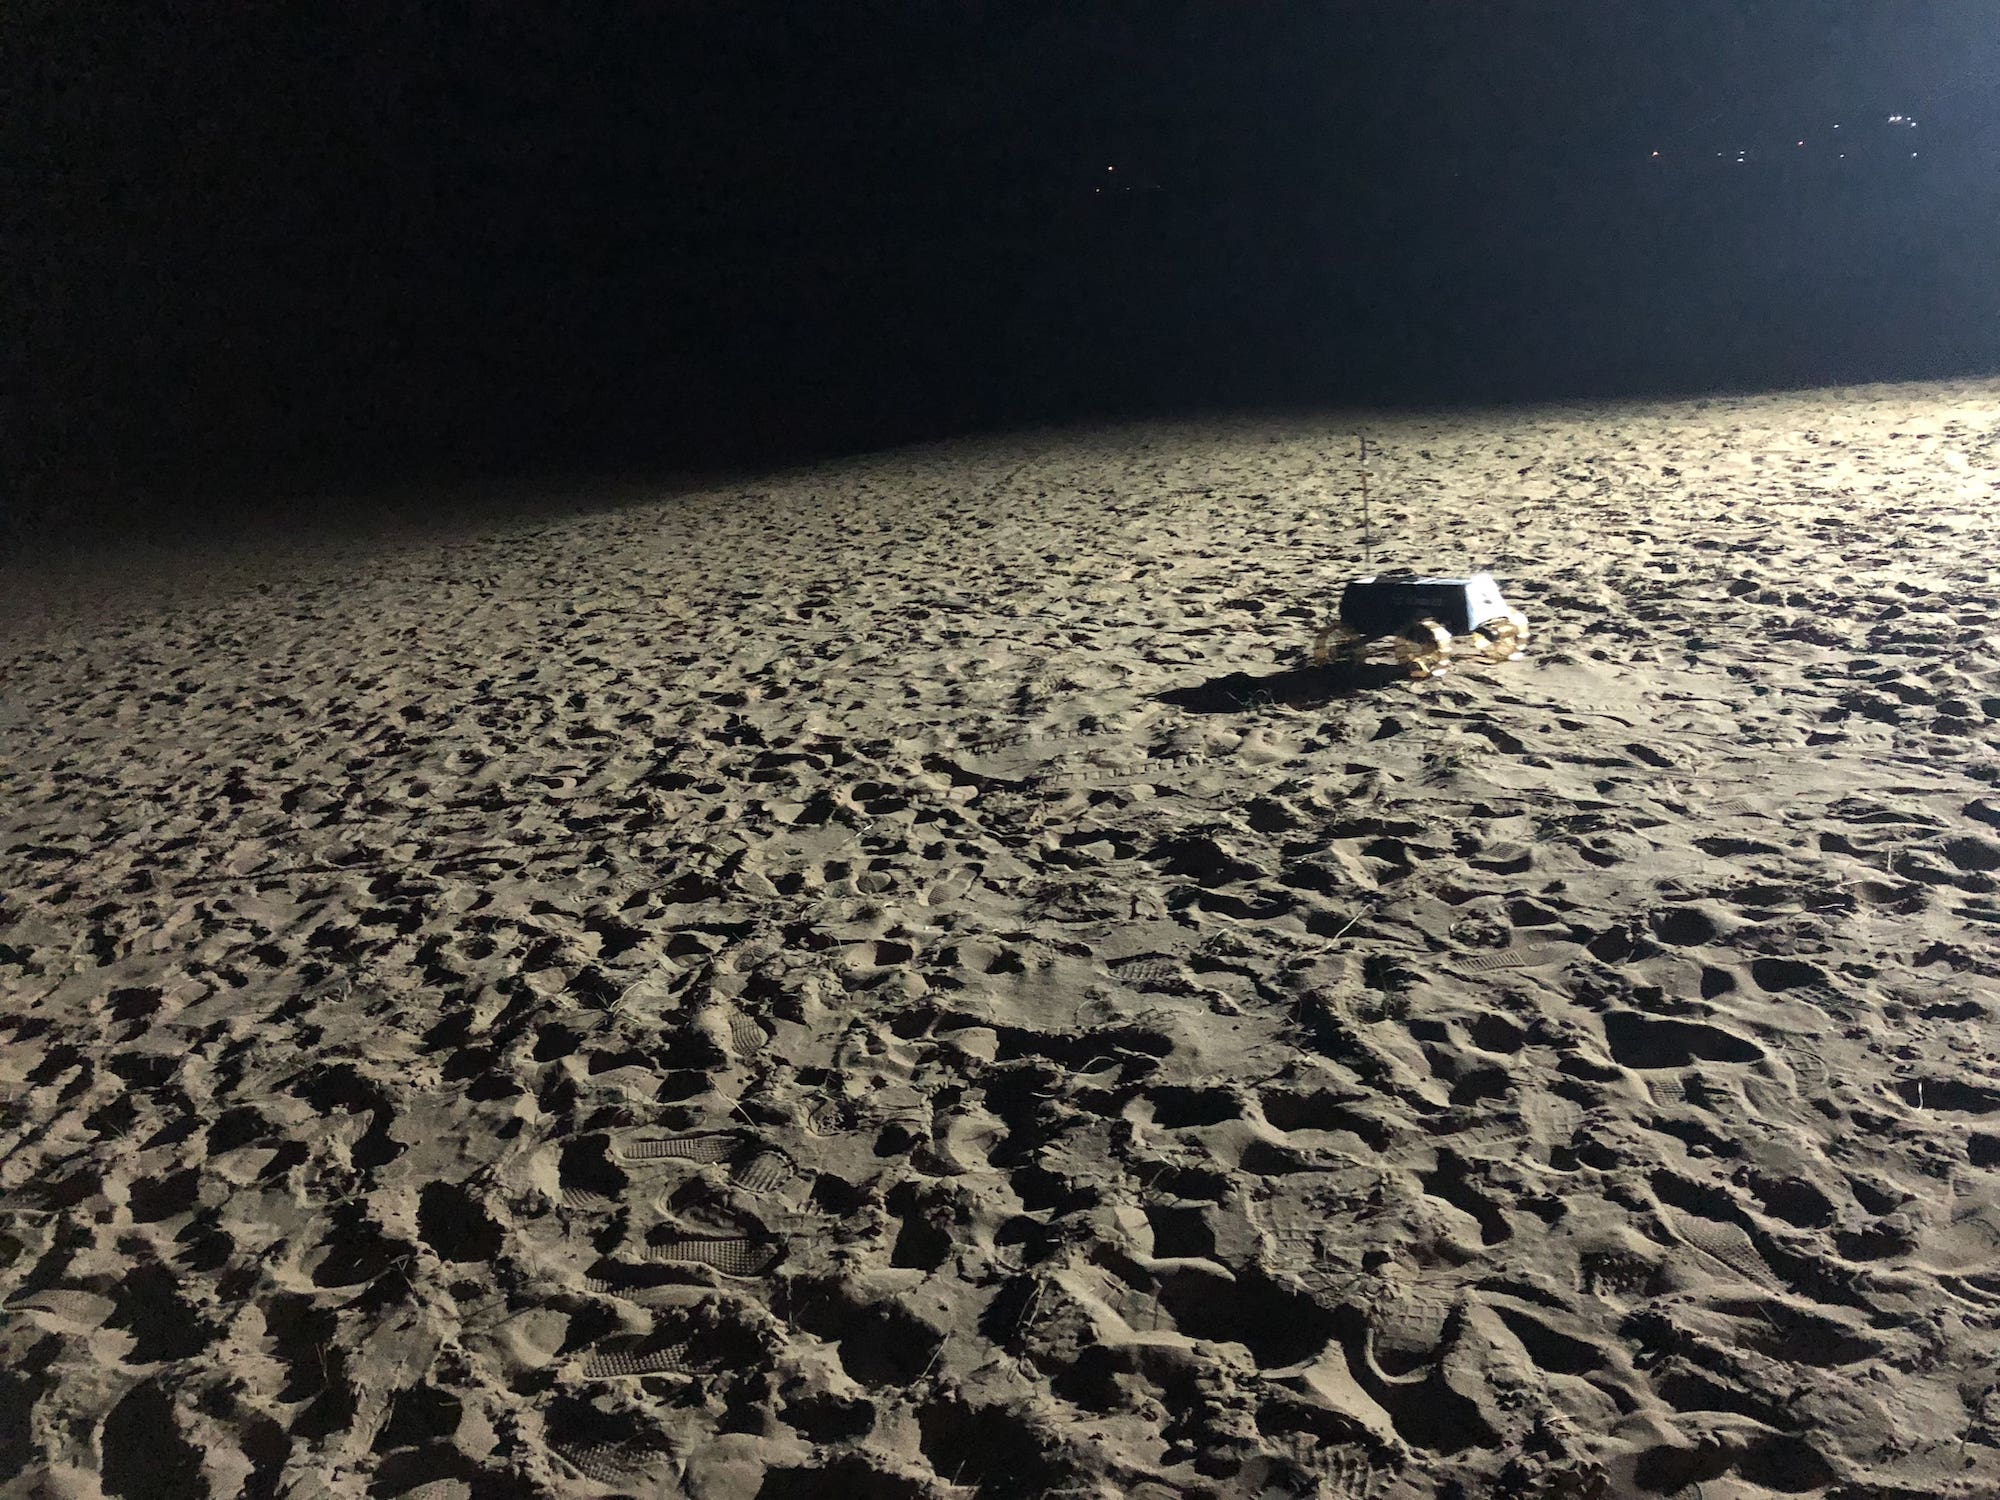 Rover on a field test in Tottori sand dunes